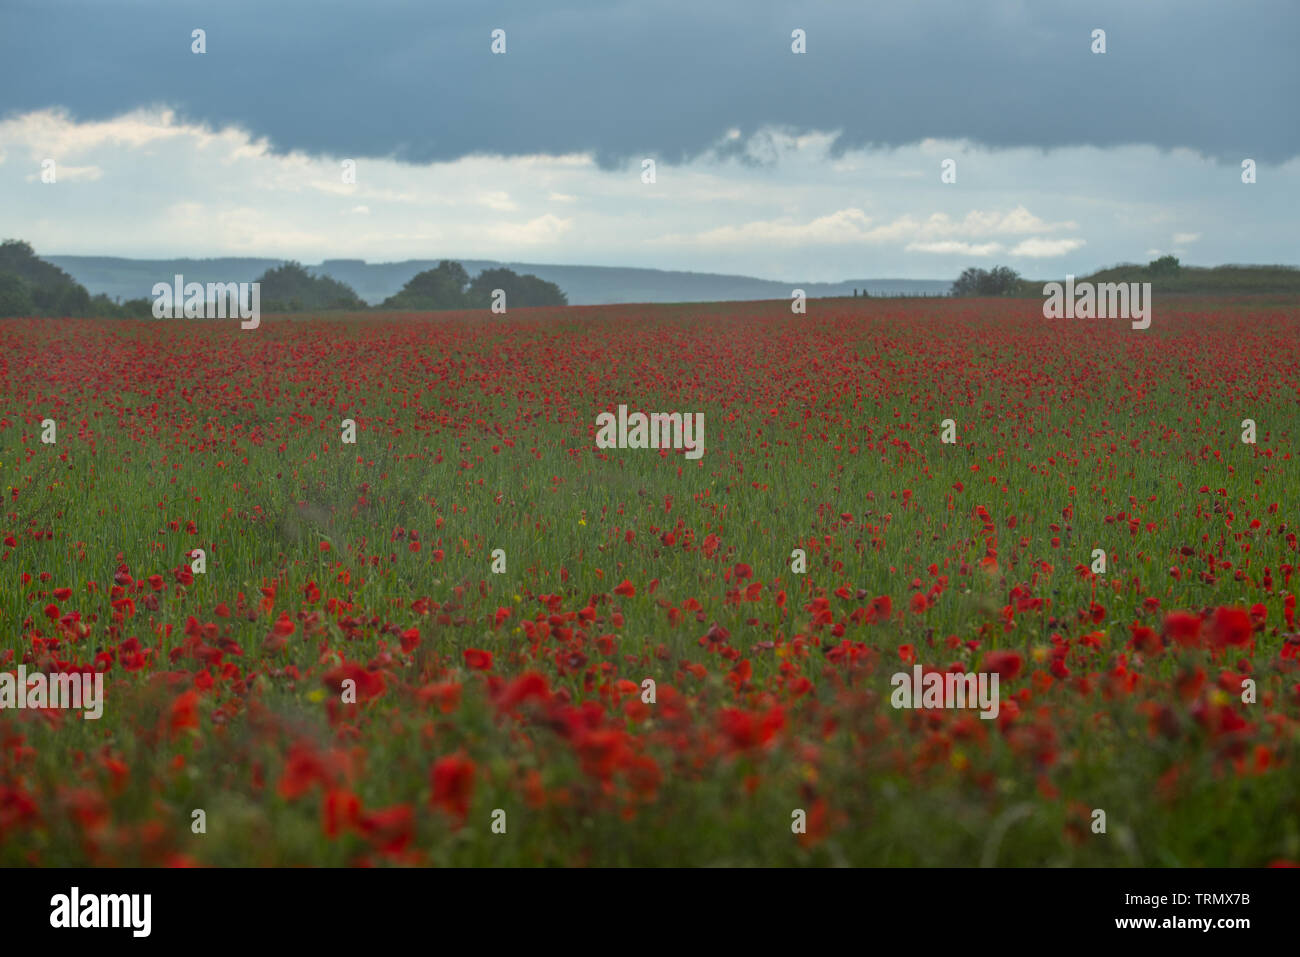 Berwick St James, Wiltshire, UK. 9th June 2019. UK Weather: Dark storm clouds gather over a field of bright red poppies  on the Wiltshire Downs near the A303 on an a mixed day of sunshine and rain showers.  Credit: Celia McMahon/Alamy Live News. Stock Photo